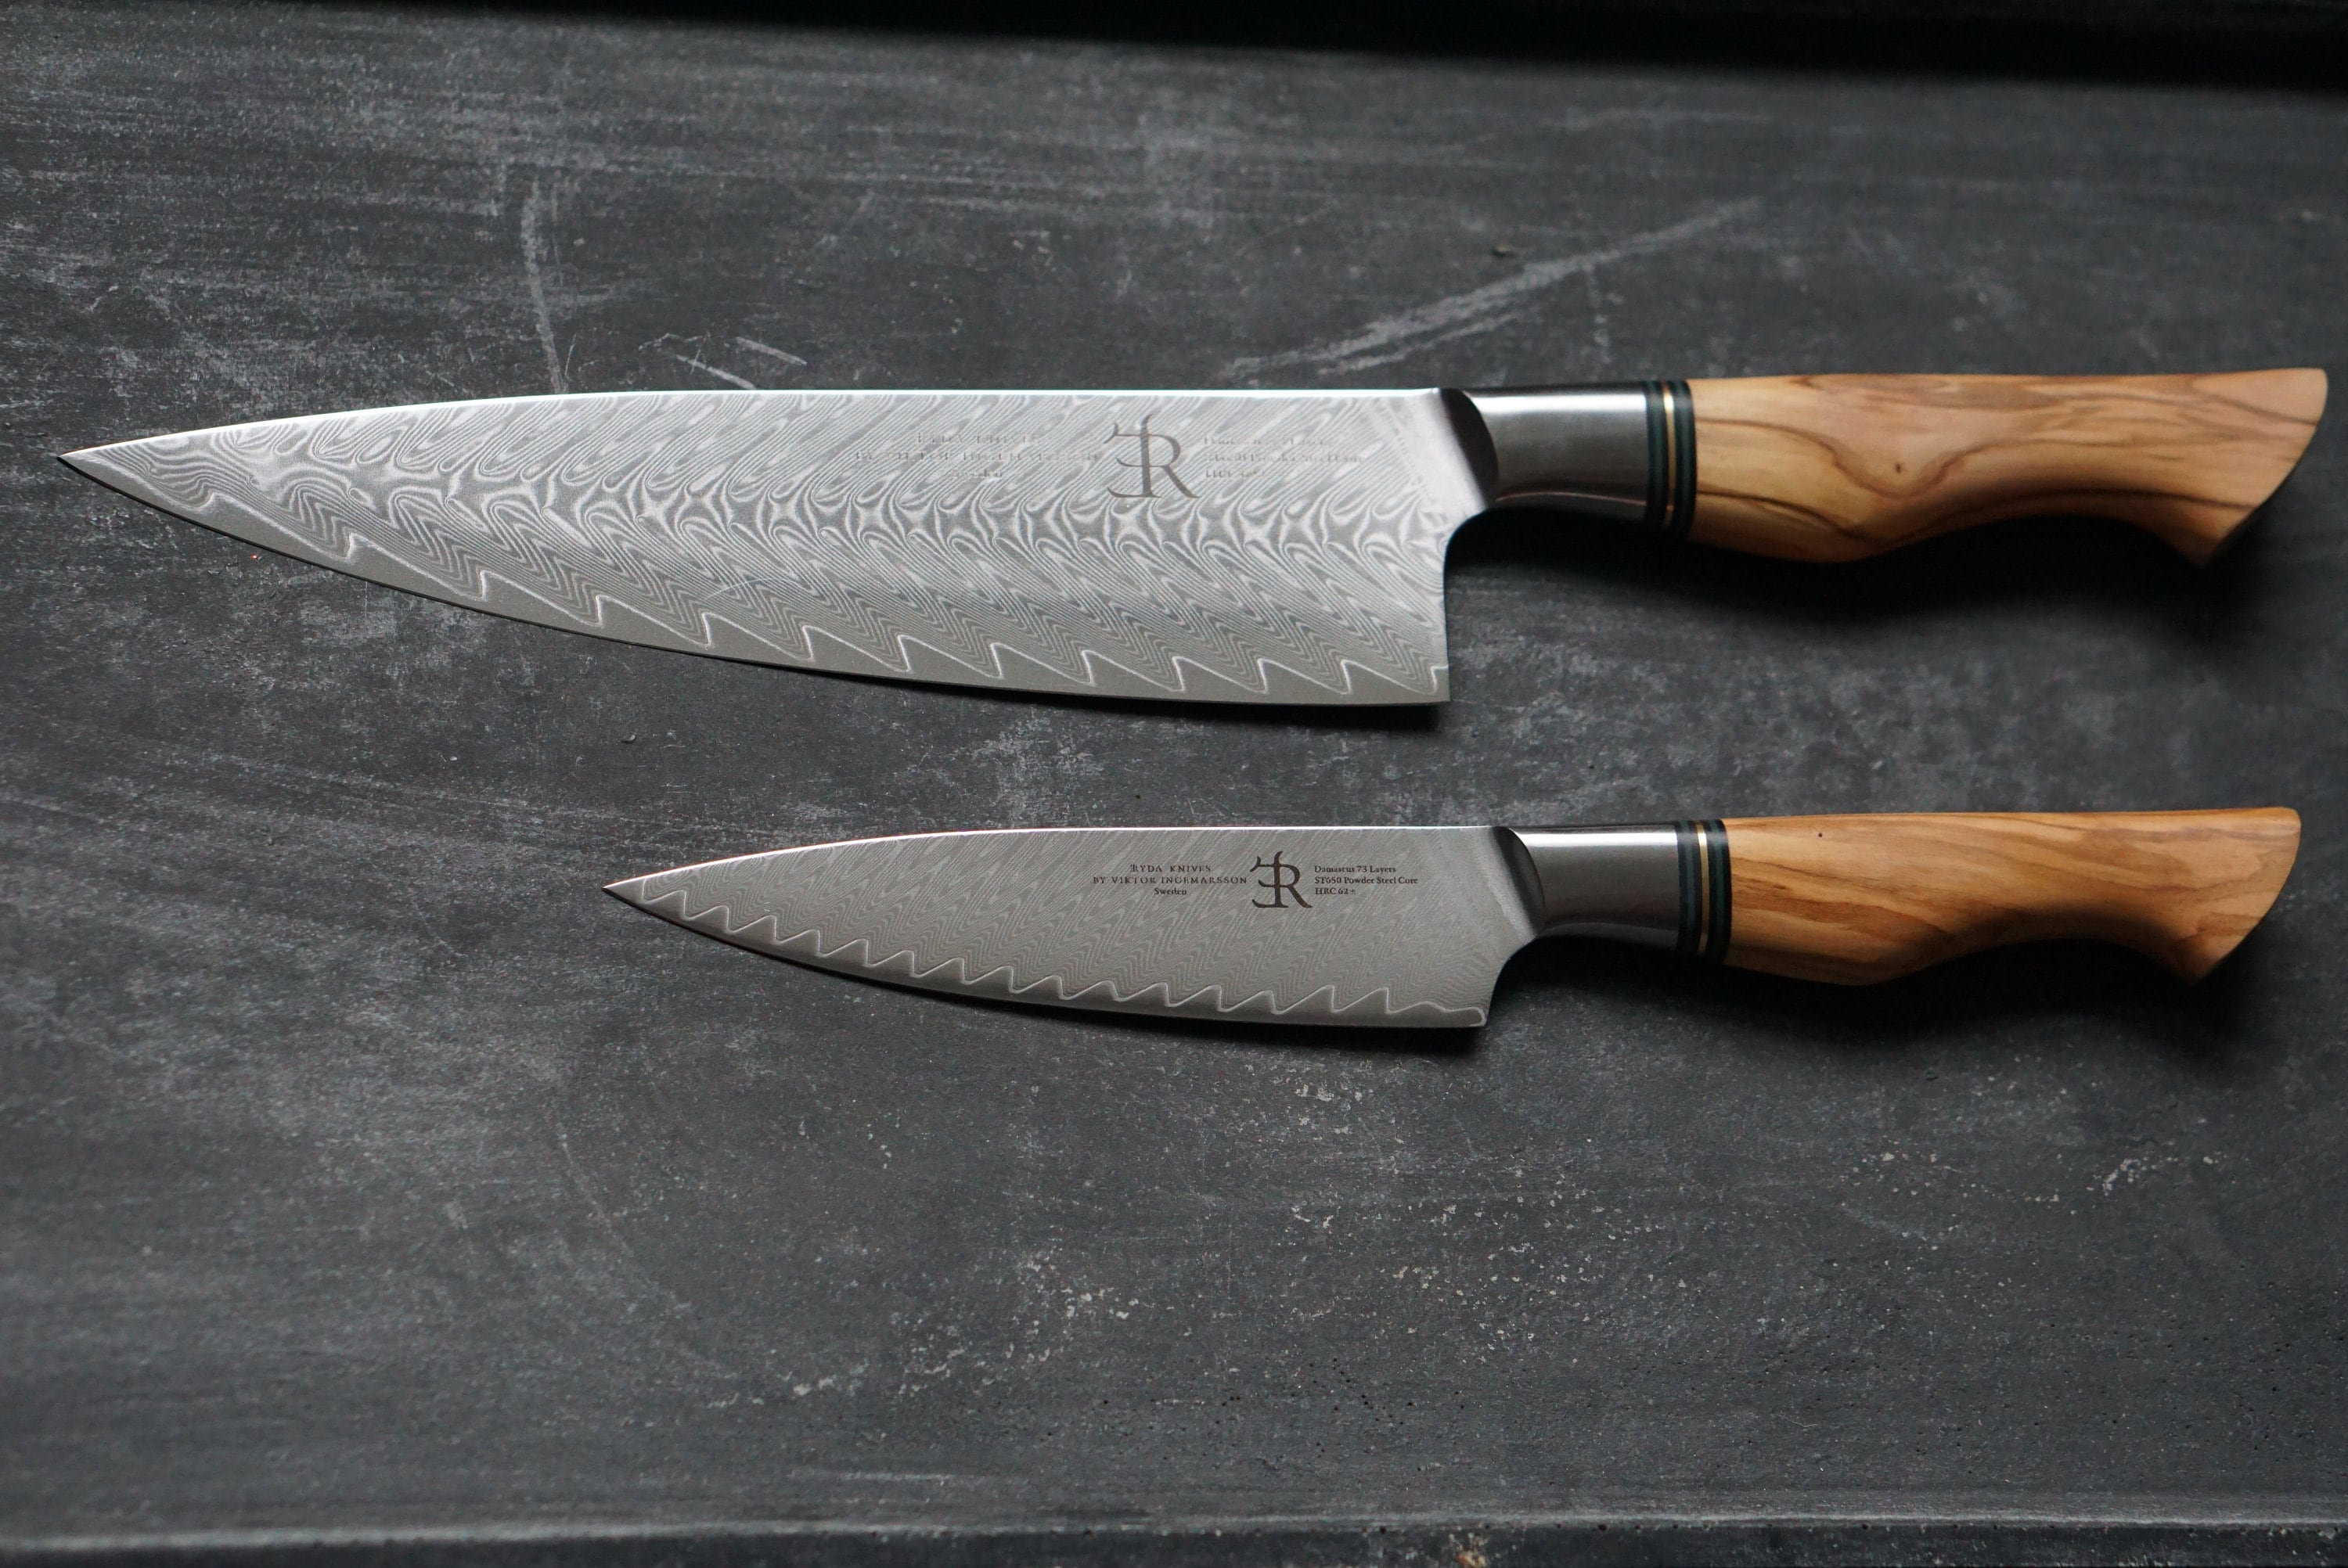 Detailed Kan Core Chef Knife Review and Recommendation